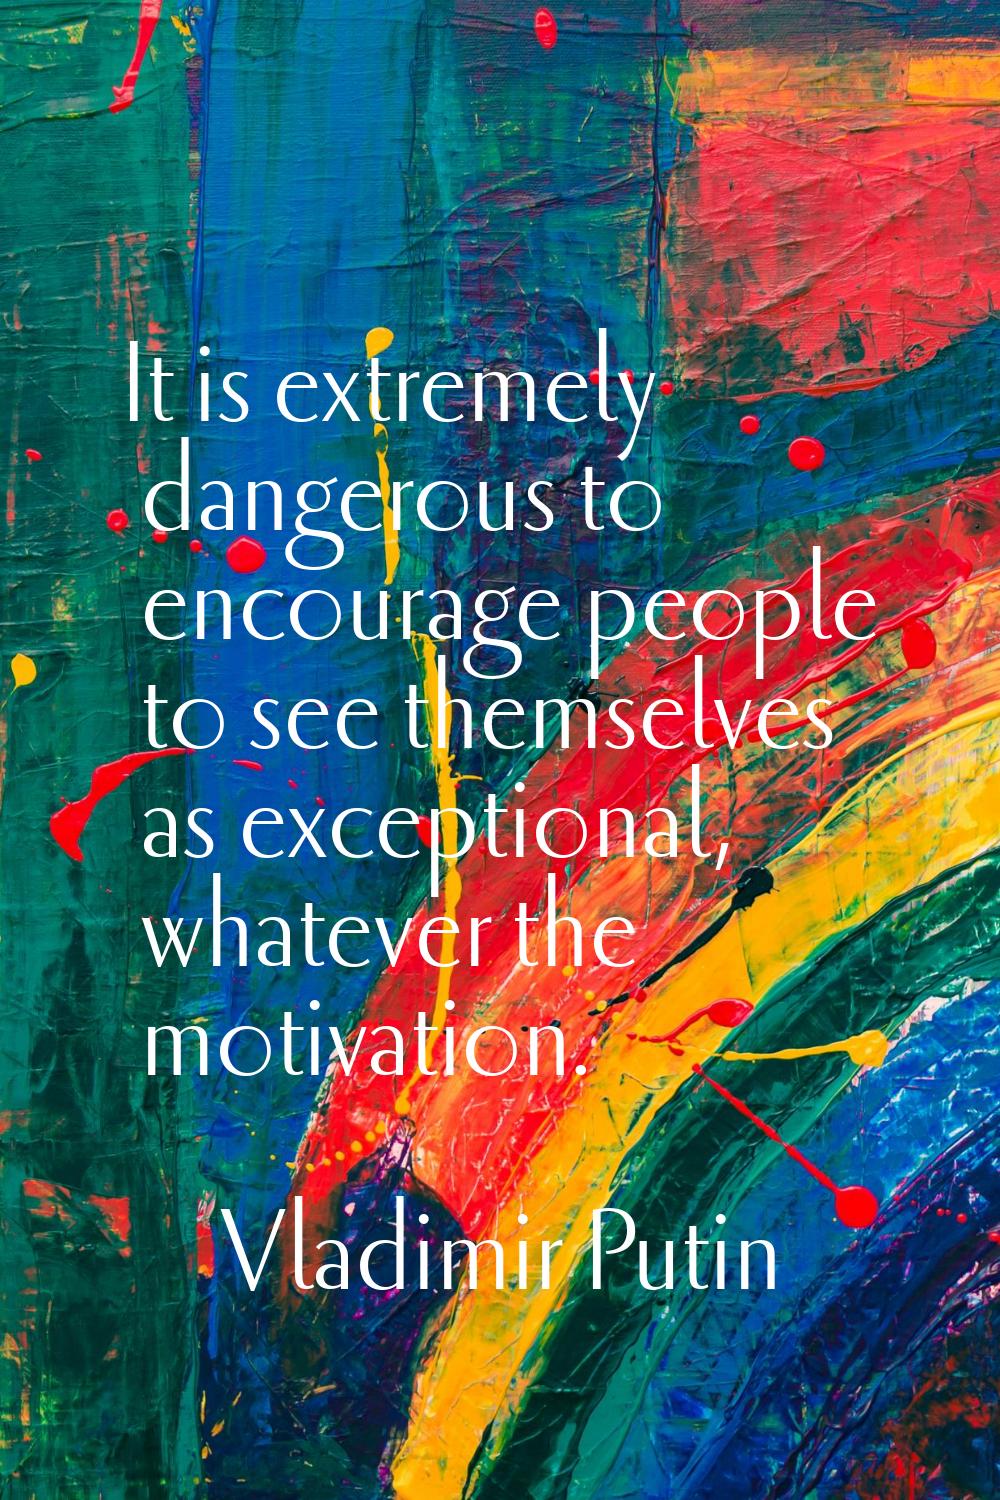 It is extremely dangerous to encourage people to see themselves as exceptional, whatever the motiva